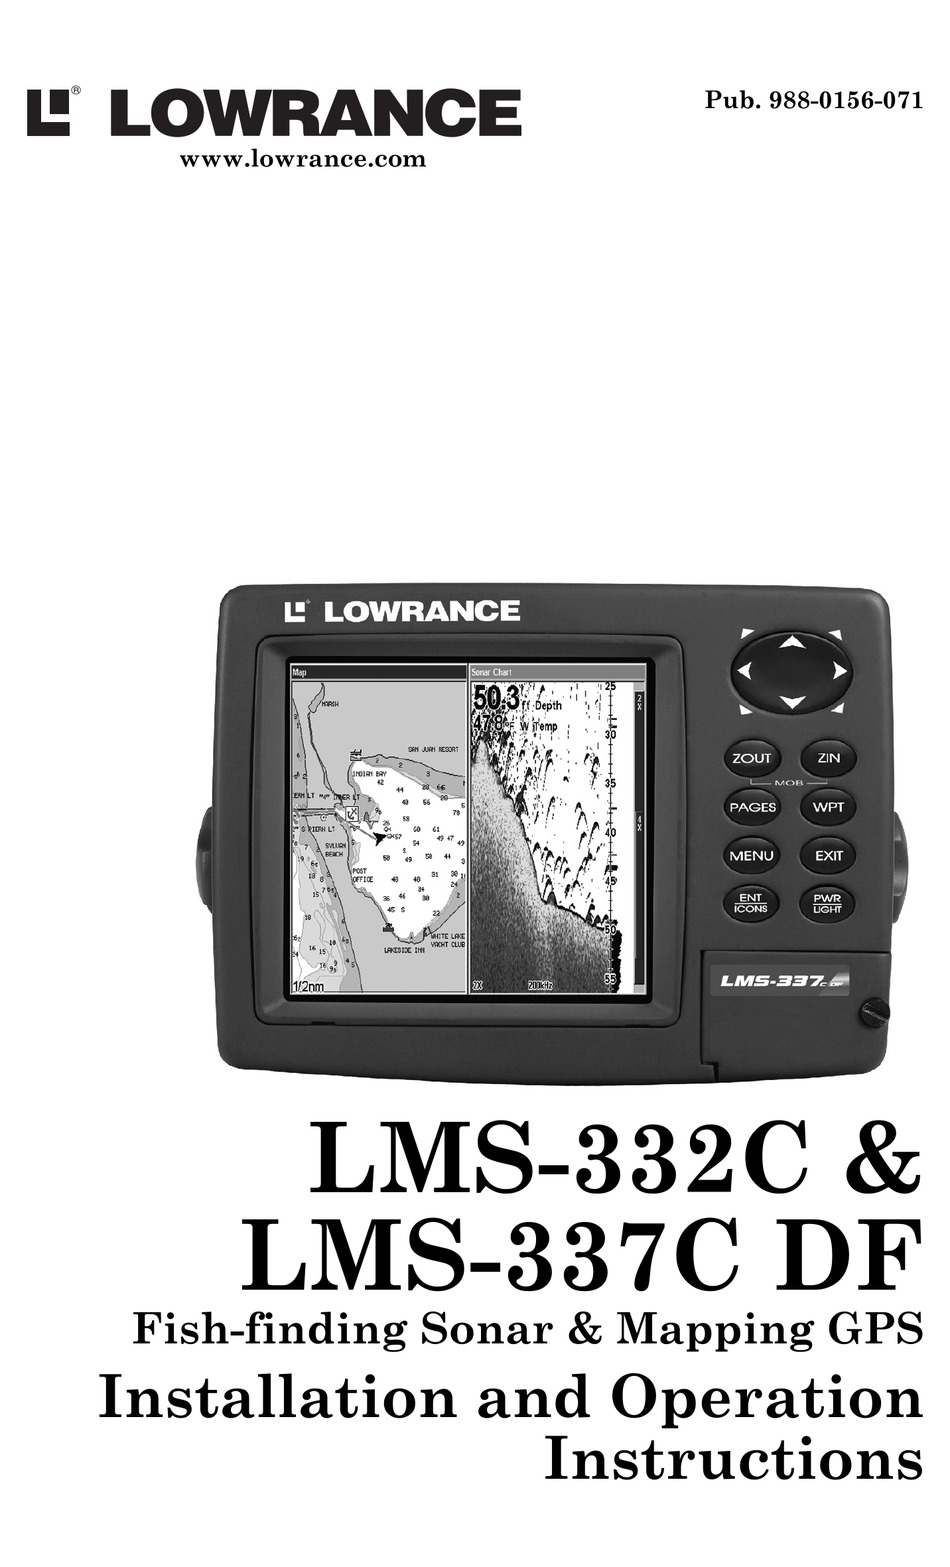 so you have to use lms 332c power nmea 2000 network